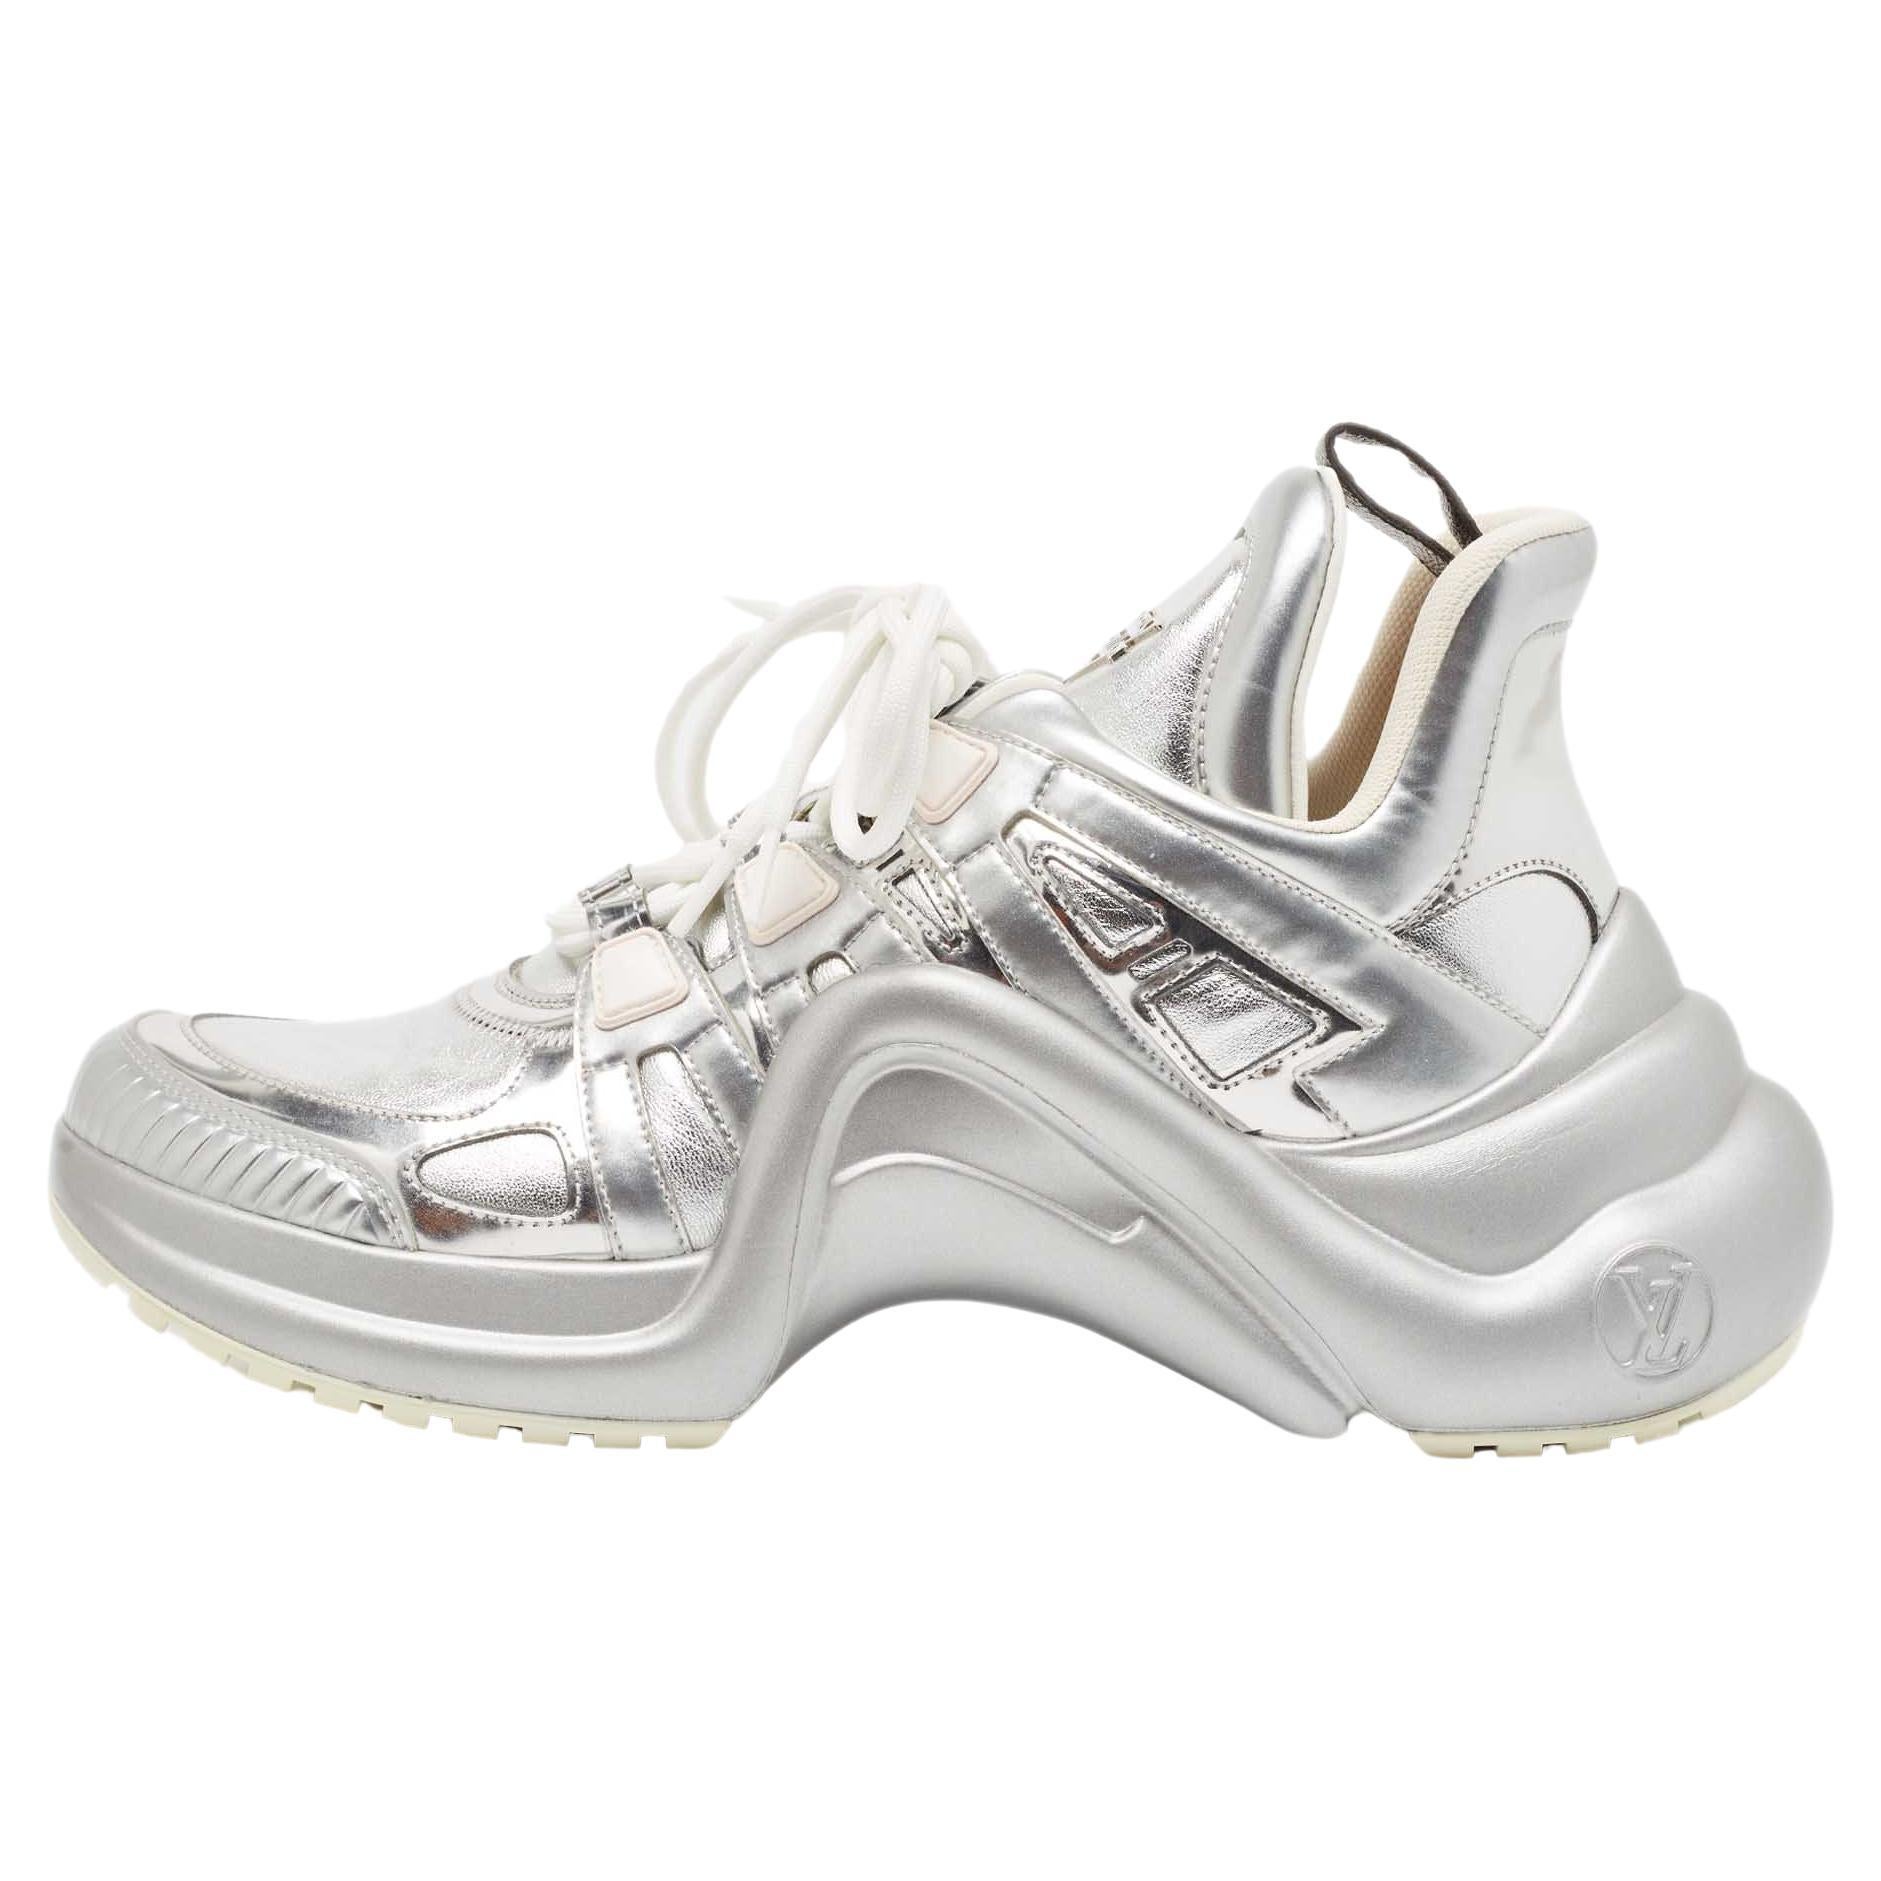 Louis Vuitton Silver Leather Archlight Sneakers Size 40 For Sale